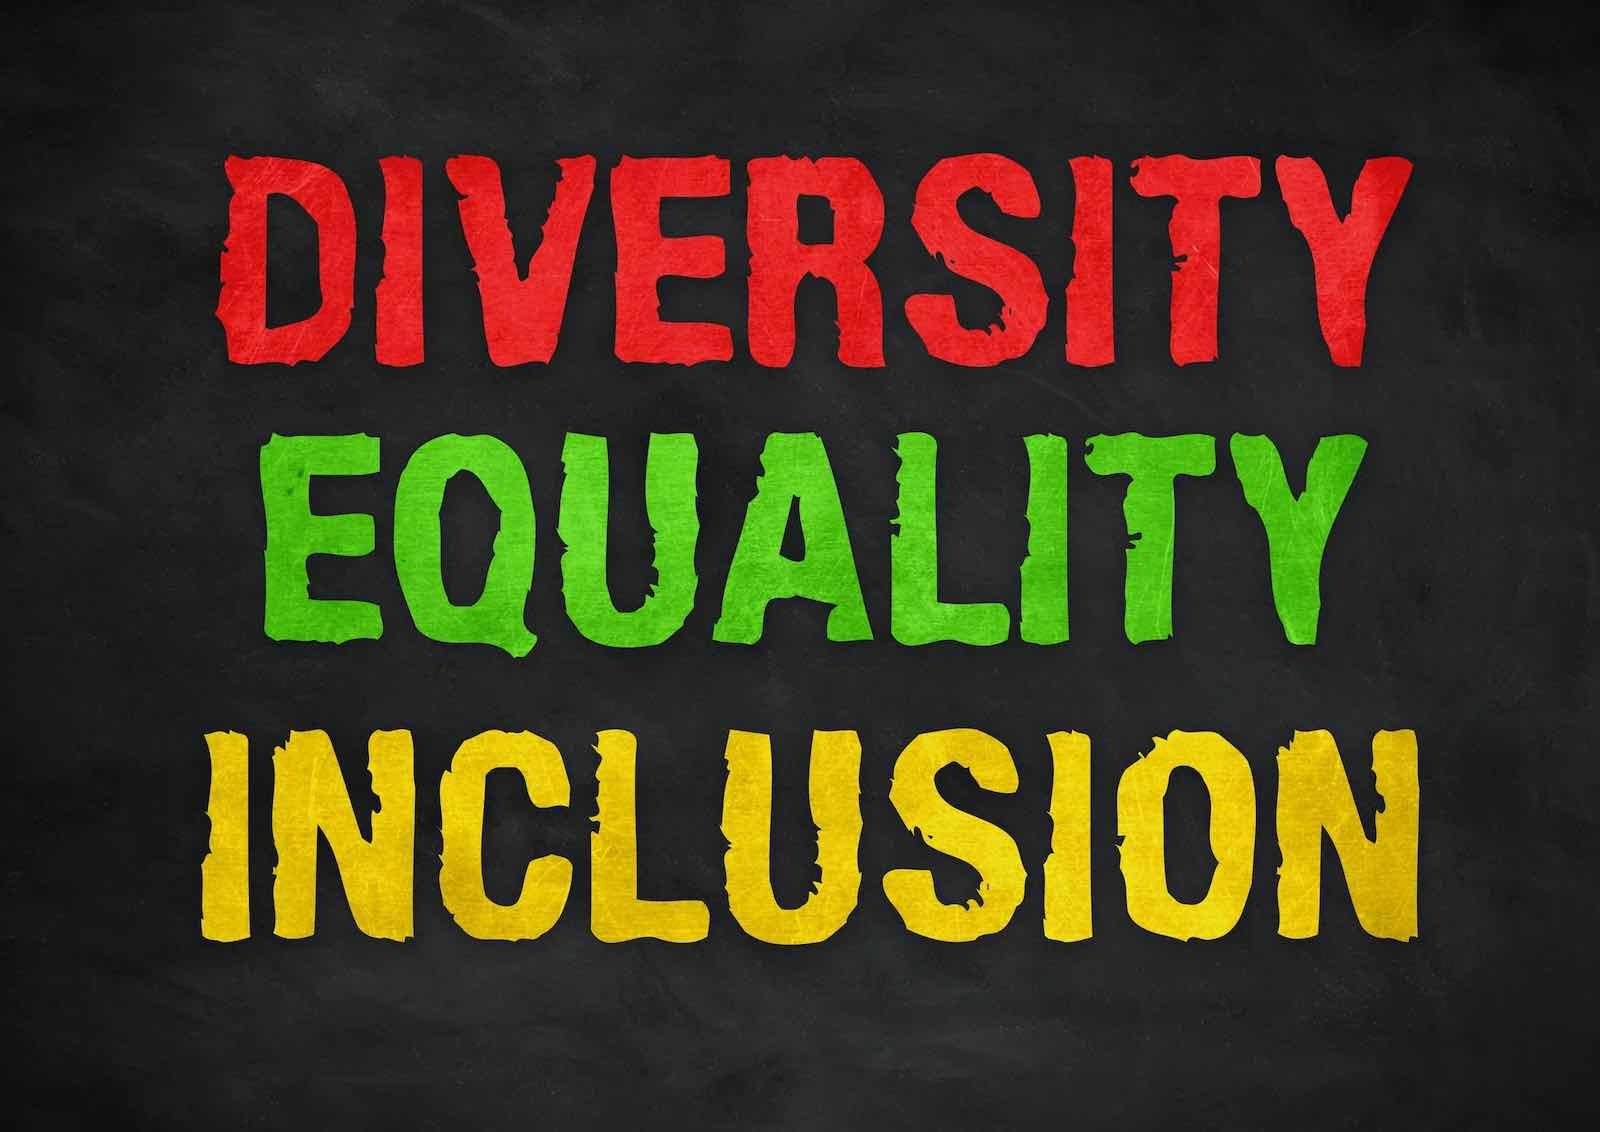 Diversity Equity Inclusion